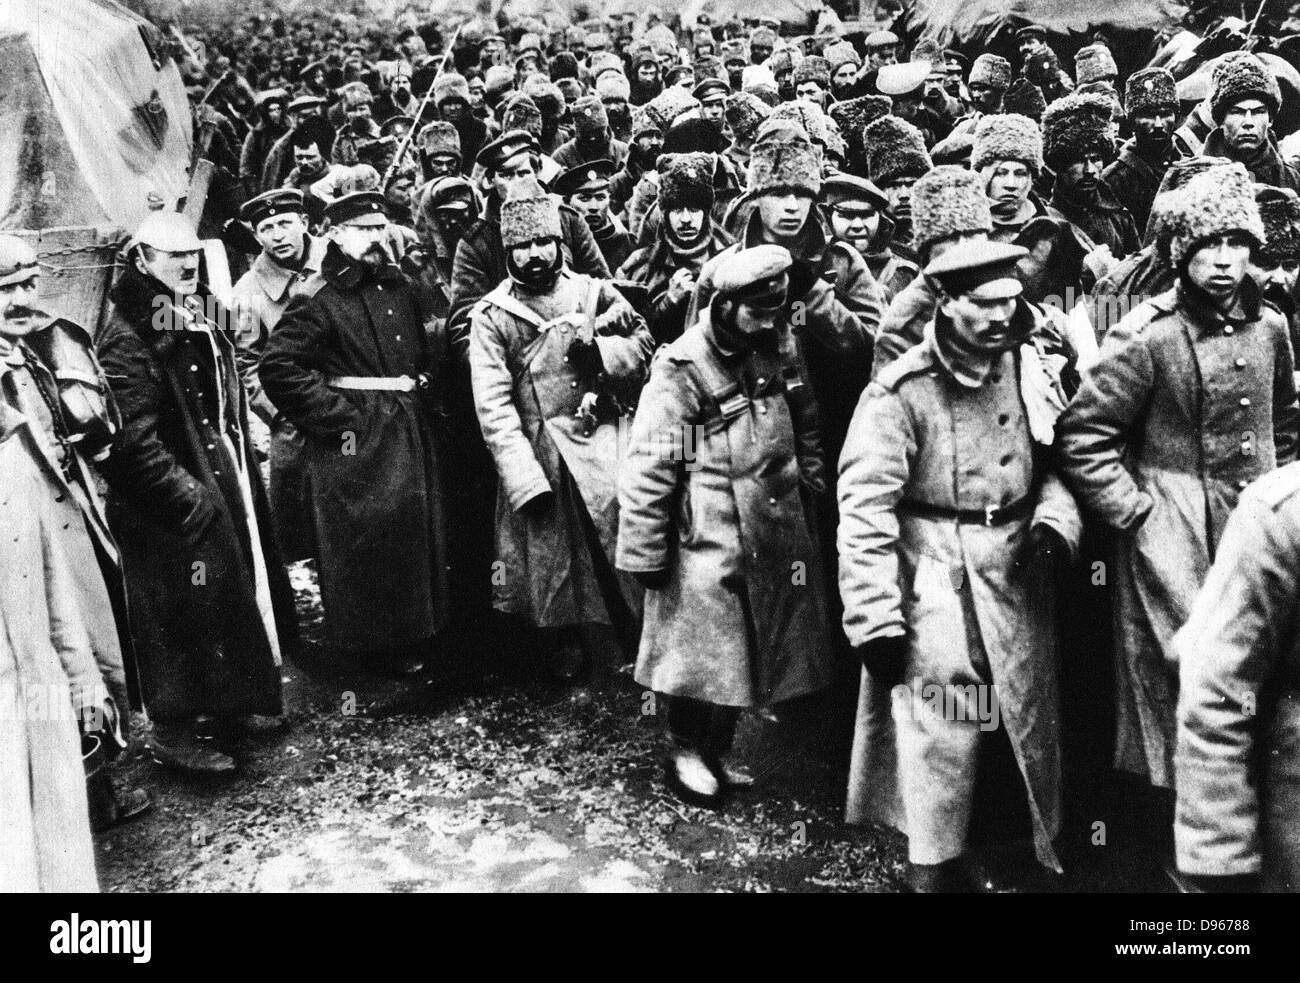 Russians taken prisoner by Germany on the Eastern front, World War I. Among them are many Cossacks in their distinctive fur hats. Stock Photo